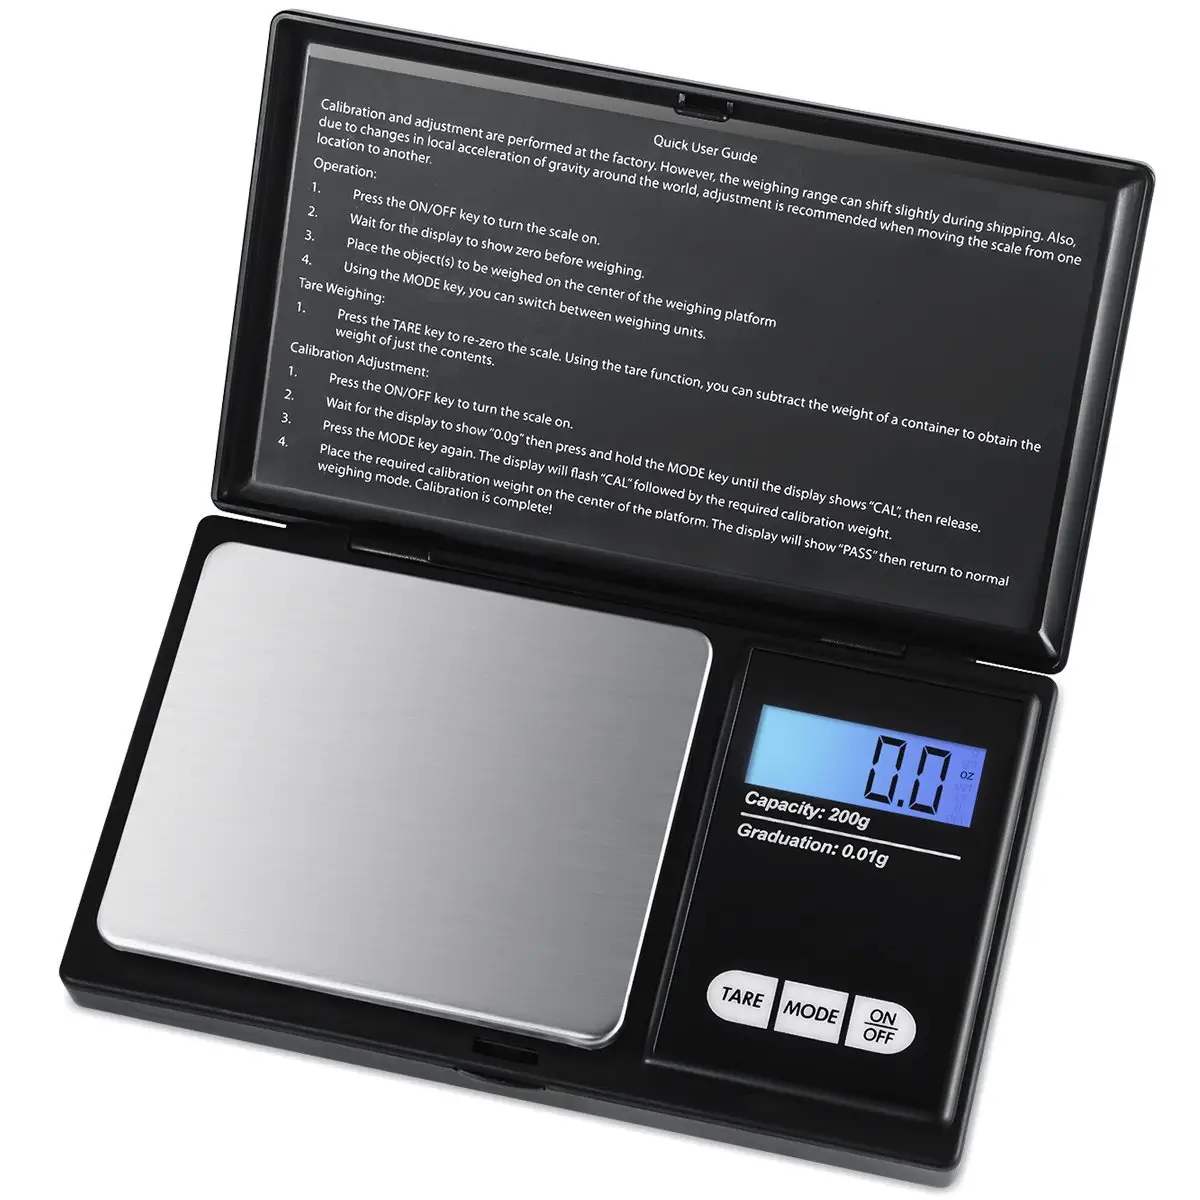 Hot Selling 0 01g Mini Electronic Scales Pocket Digital Gold Jewelry Scale Digital Pocket Scale